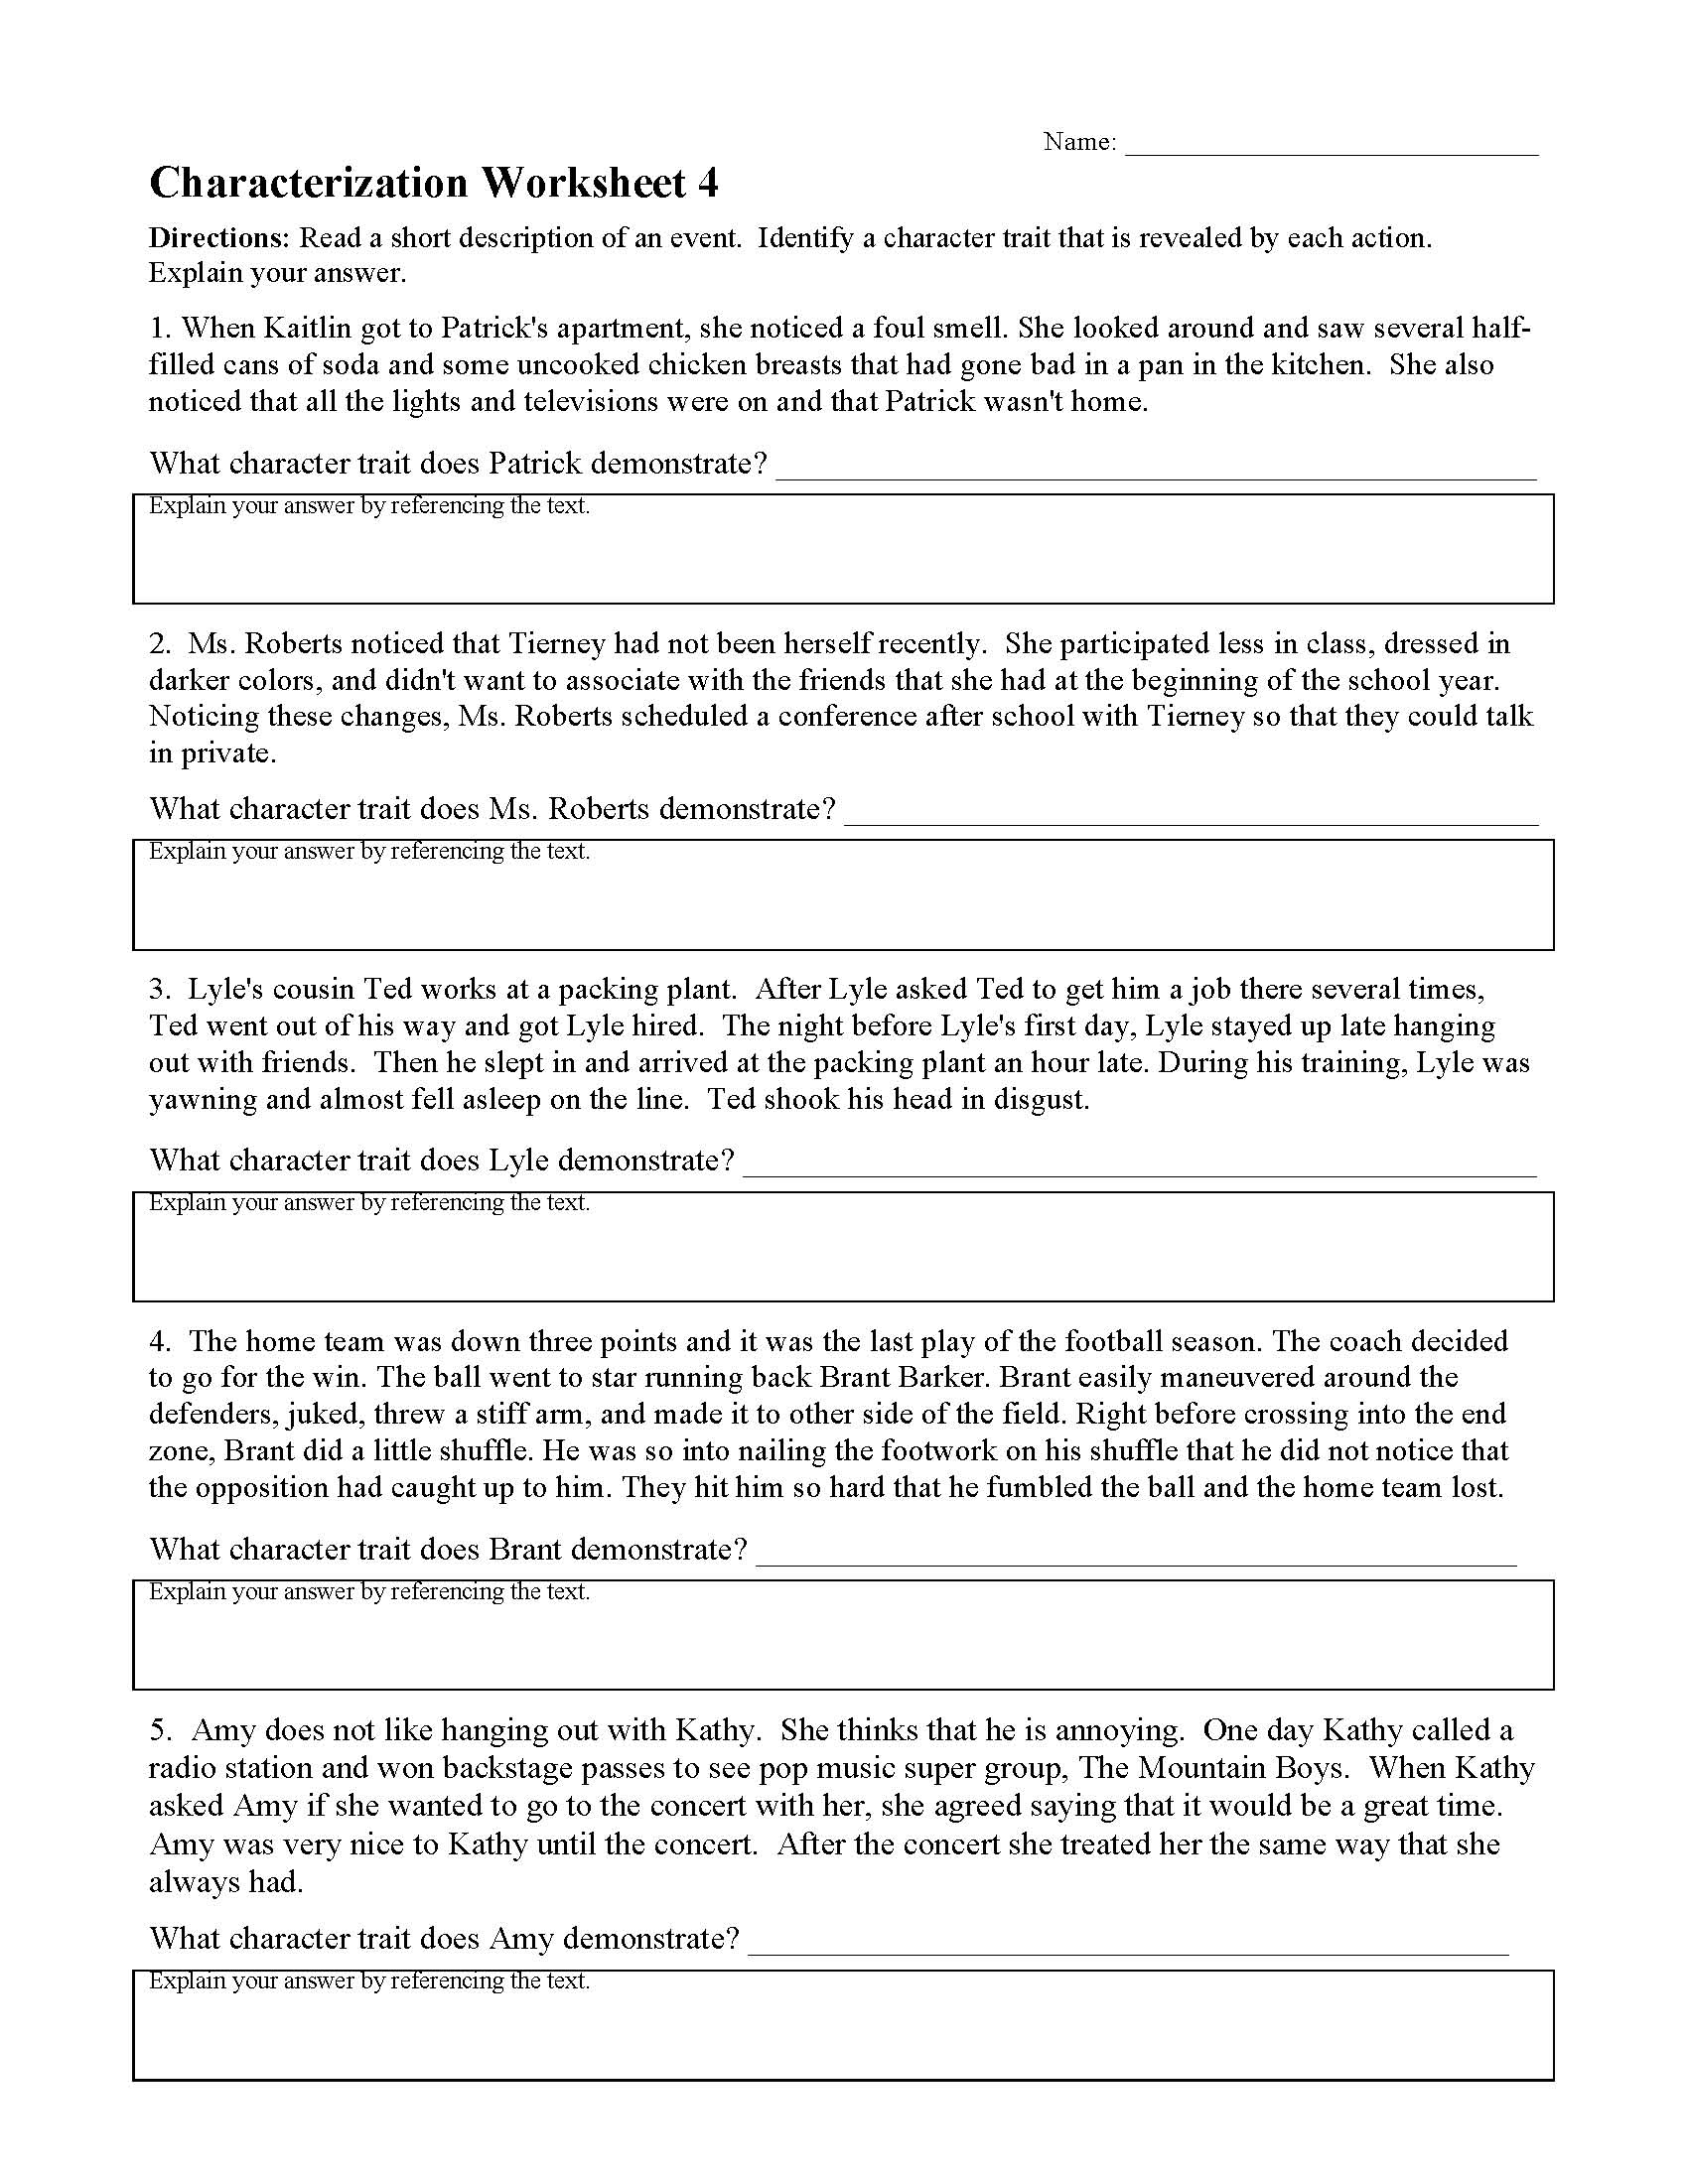 character analysis worksheet answers